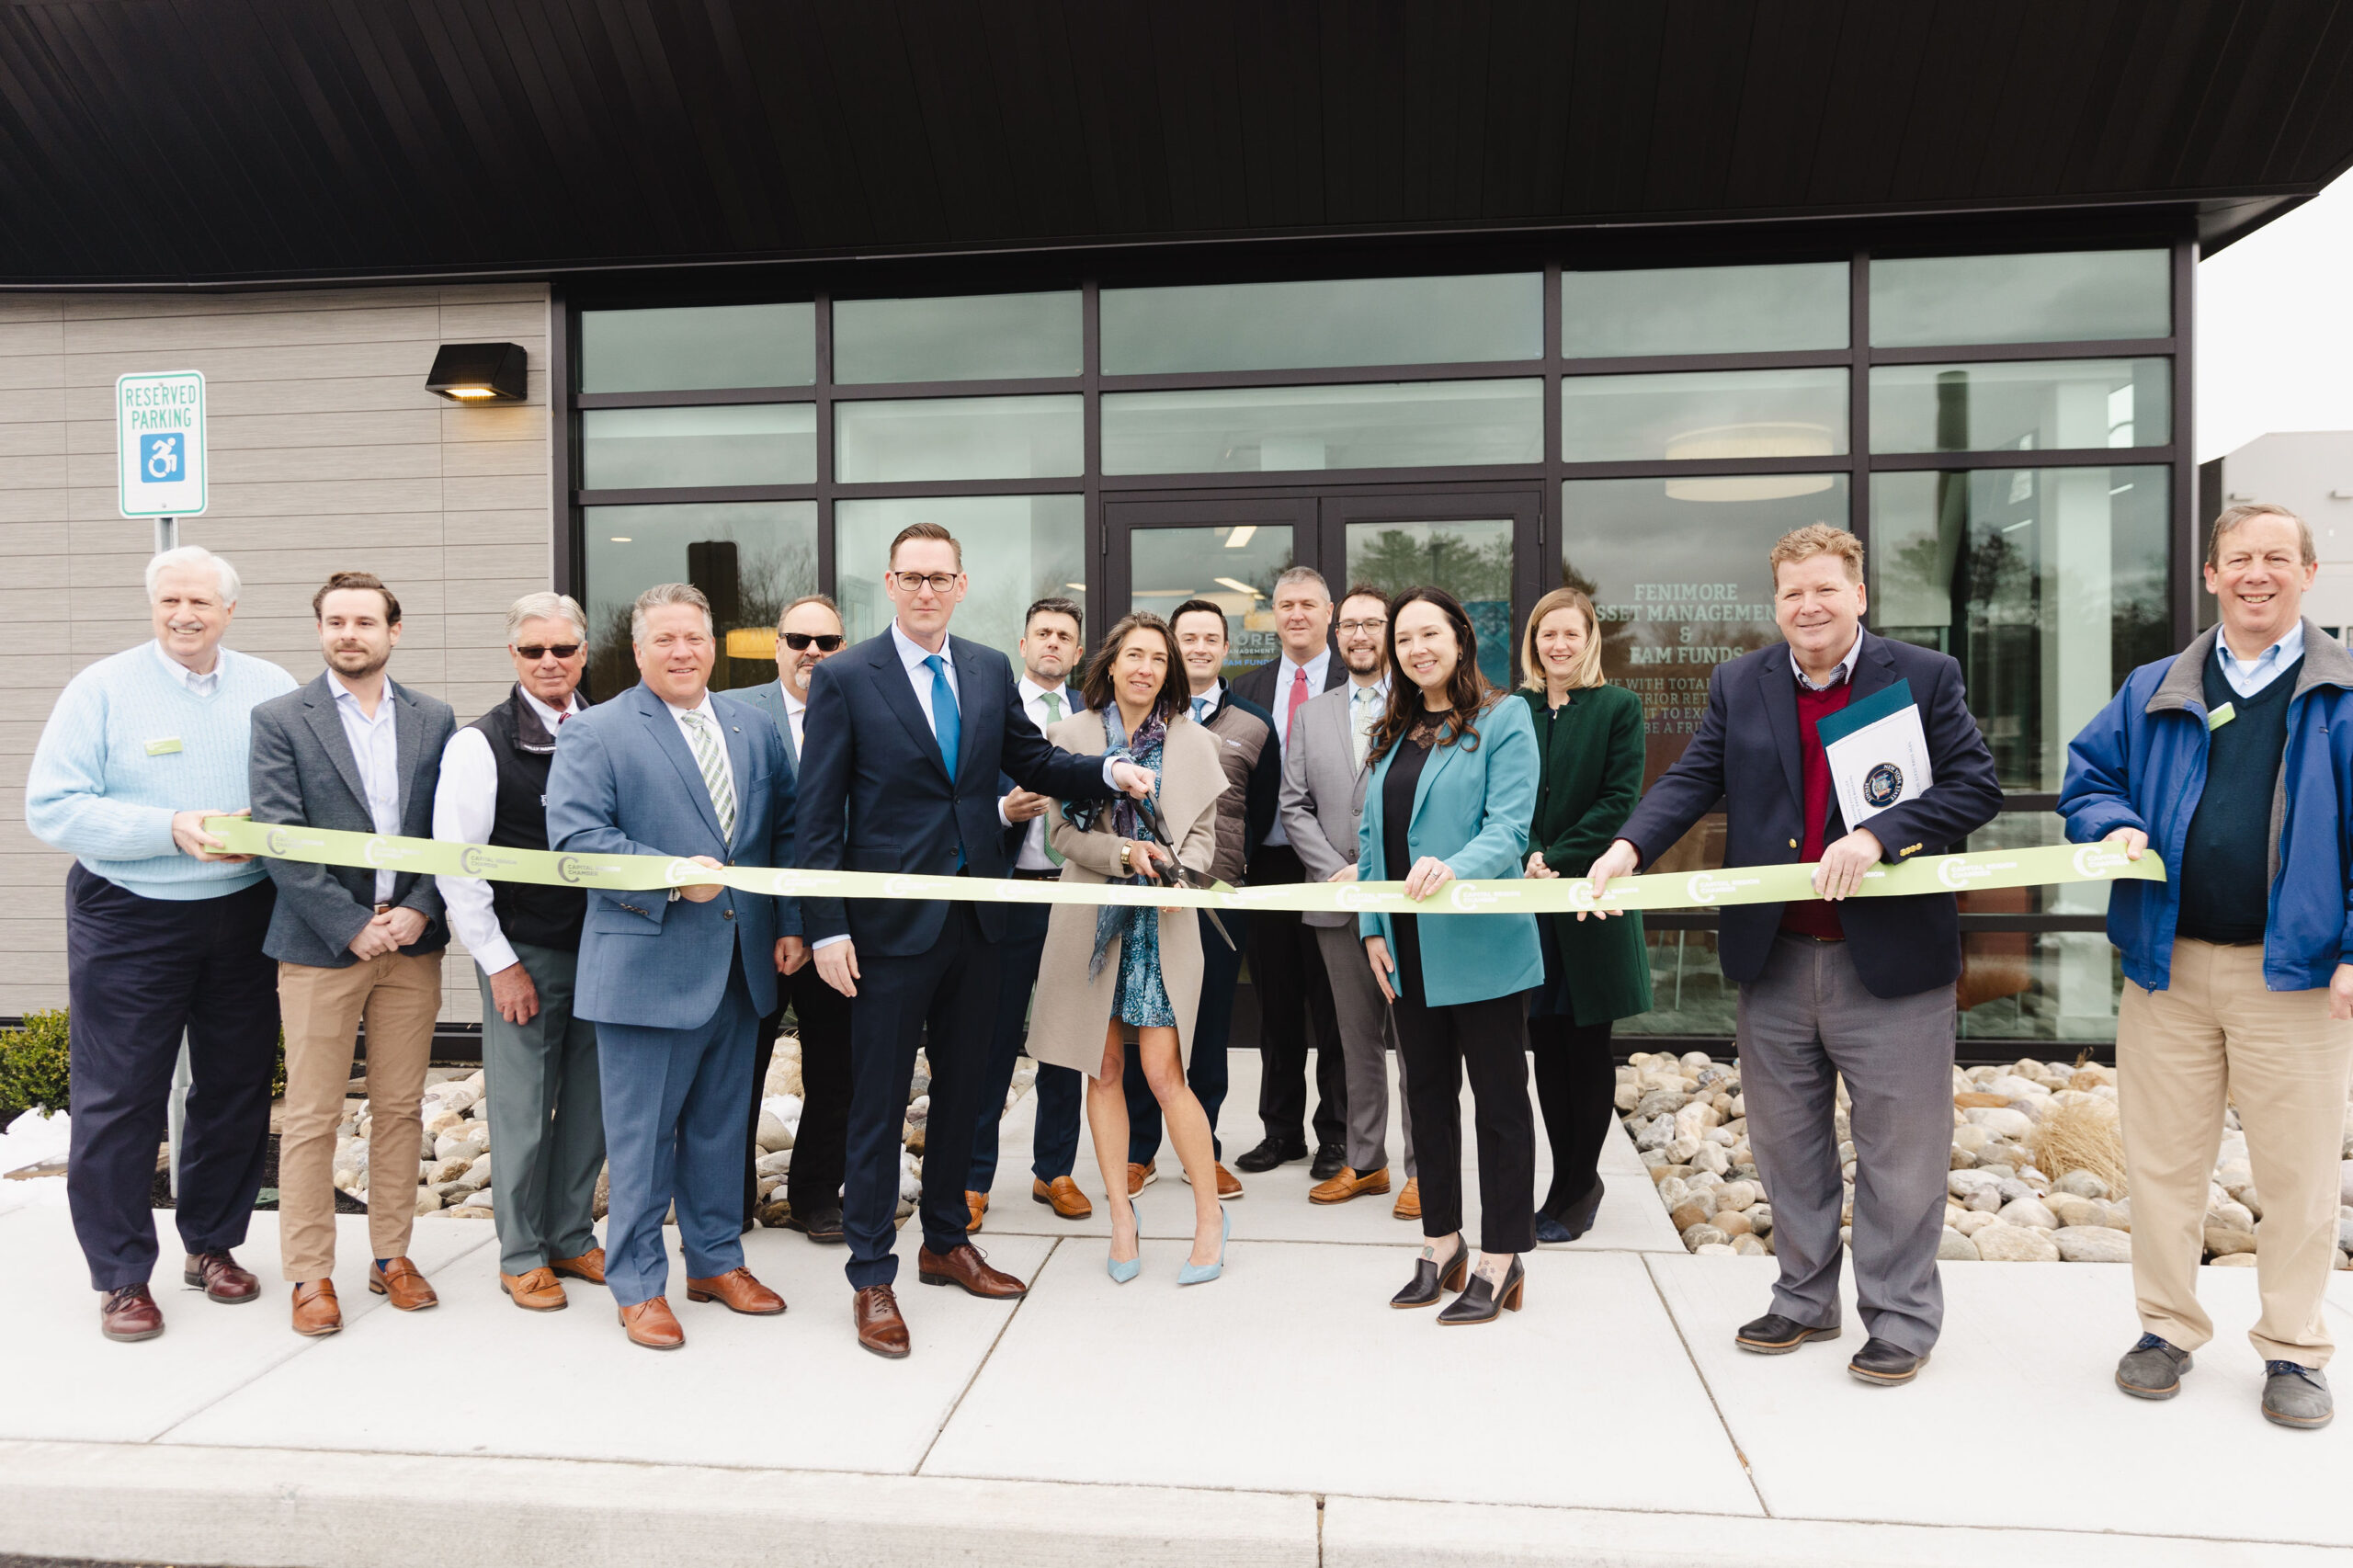 FENIMORE CELEBRATES NEW ALBANY OFFICE ON WOLF ROAD AND 50TH ANNIVERSARY